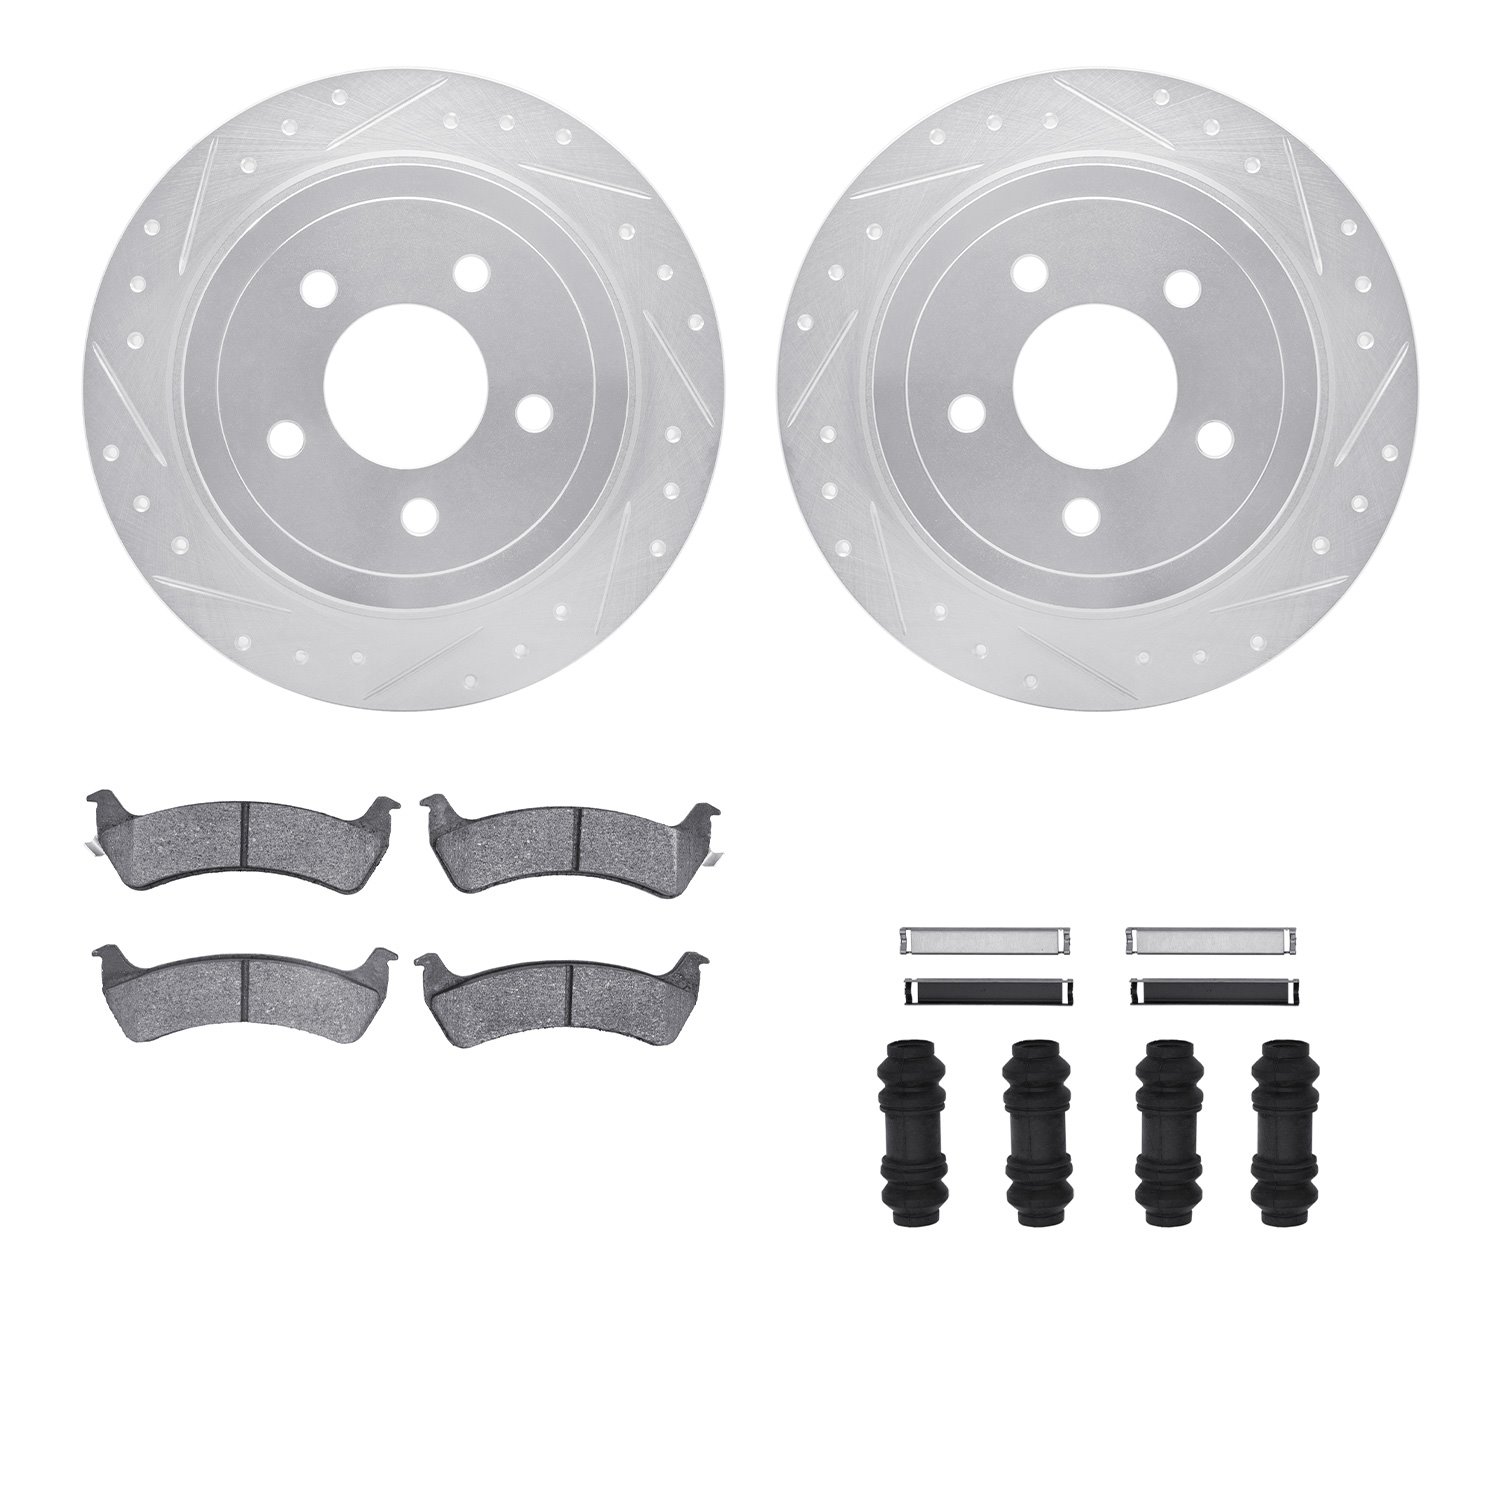 7212-99180 Drilled/Slotted Rotors w/Heavy-Duty Brake Pads Kit & Hardware [Silver], 2003-2005 Ford/Lincoln/Mercury/Mazda, Positio